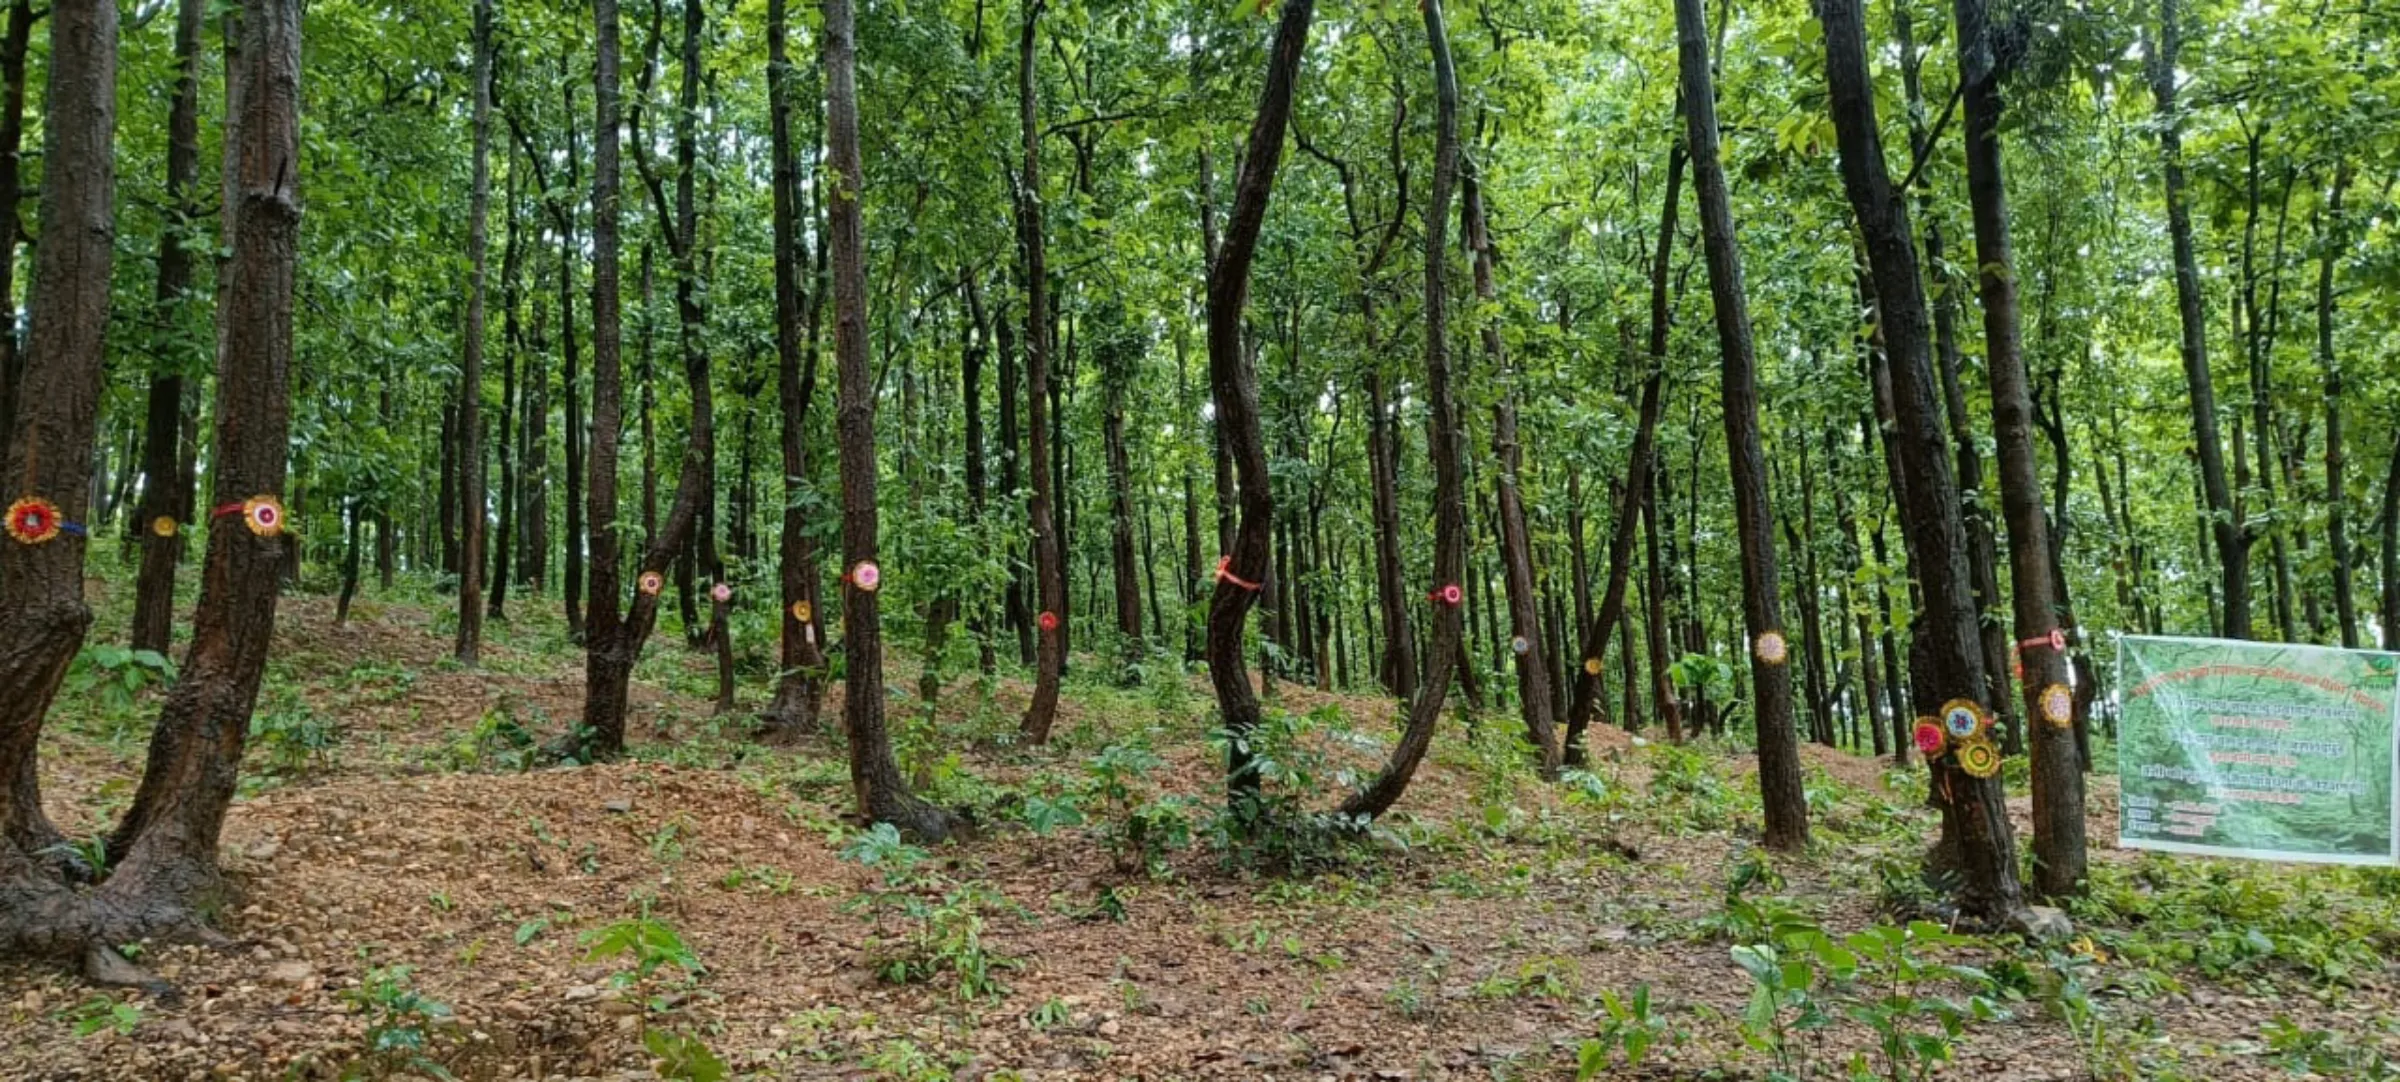 Part of the consecrated forest in Lukaiya village, where locals hold an annual festival and vow to protect the trees, in Jharkhand state, India, Aug. 28, 2022. Thomson Reuters Foundation / Sanjeev Kumar